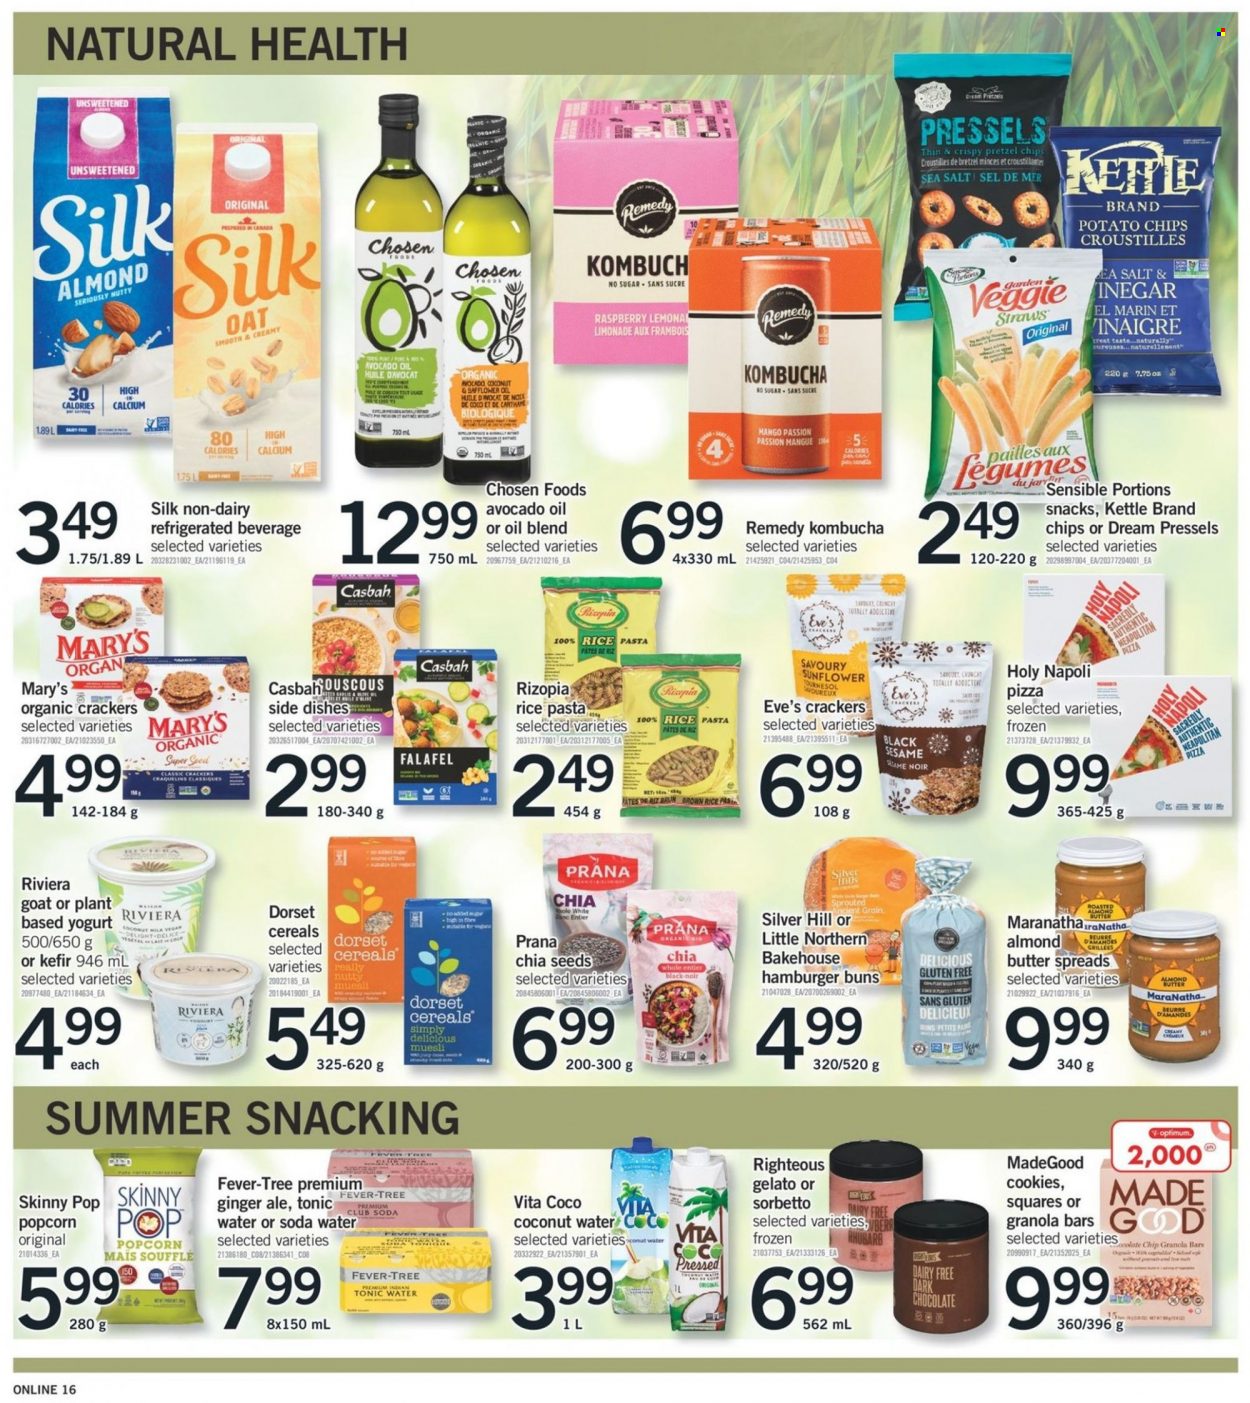 thumbnail - Fortinos Flyer - May 26, 2022 - June 01, 2022 - Sales products - pretzels, buns, burger buns, rhubarb, pizza, pasta, yoghurt, Silk, kefir, almond butter, gelato, cookies, chocolate, snack, Mars, crackers, dark chocolate, potato chips, popcorn, Skinny Pop, oats, coconut milk, cereals, granola bar, muesli, brown rice, chia seeds, avocado oil, safflower oil, ginger ale, tonic, coconut water, Club Soda, kombucha, straw, Optimum, Hill's, table, plant seeds, sunflower. Page 15.